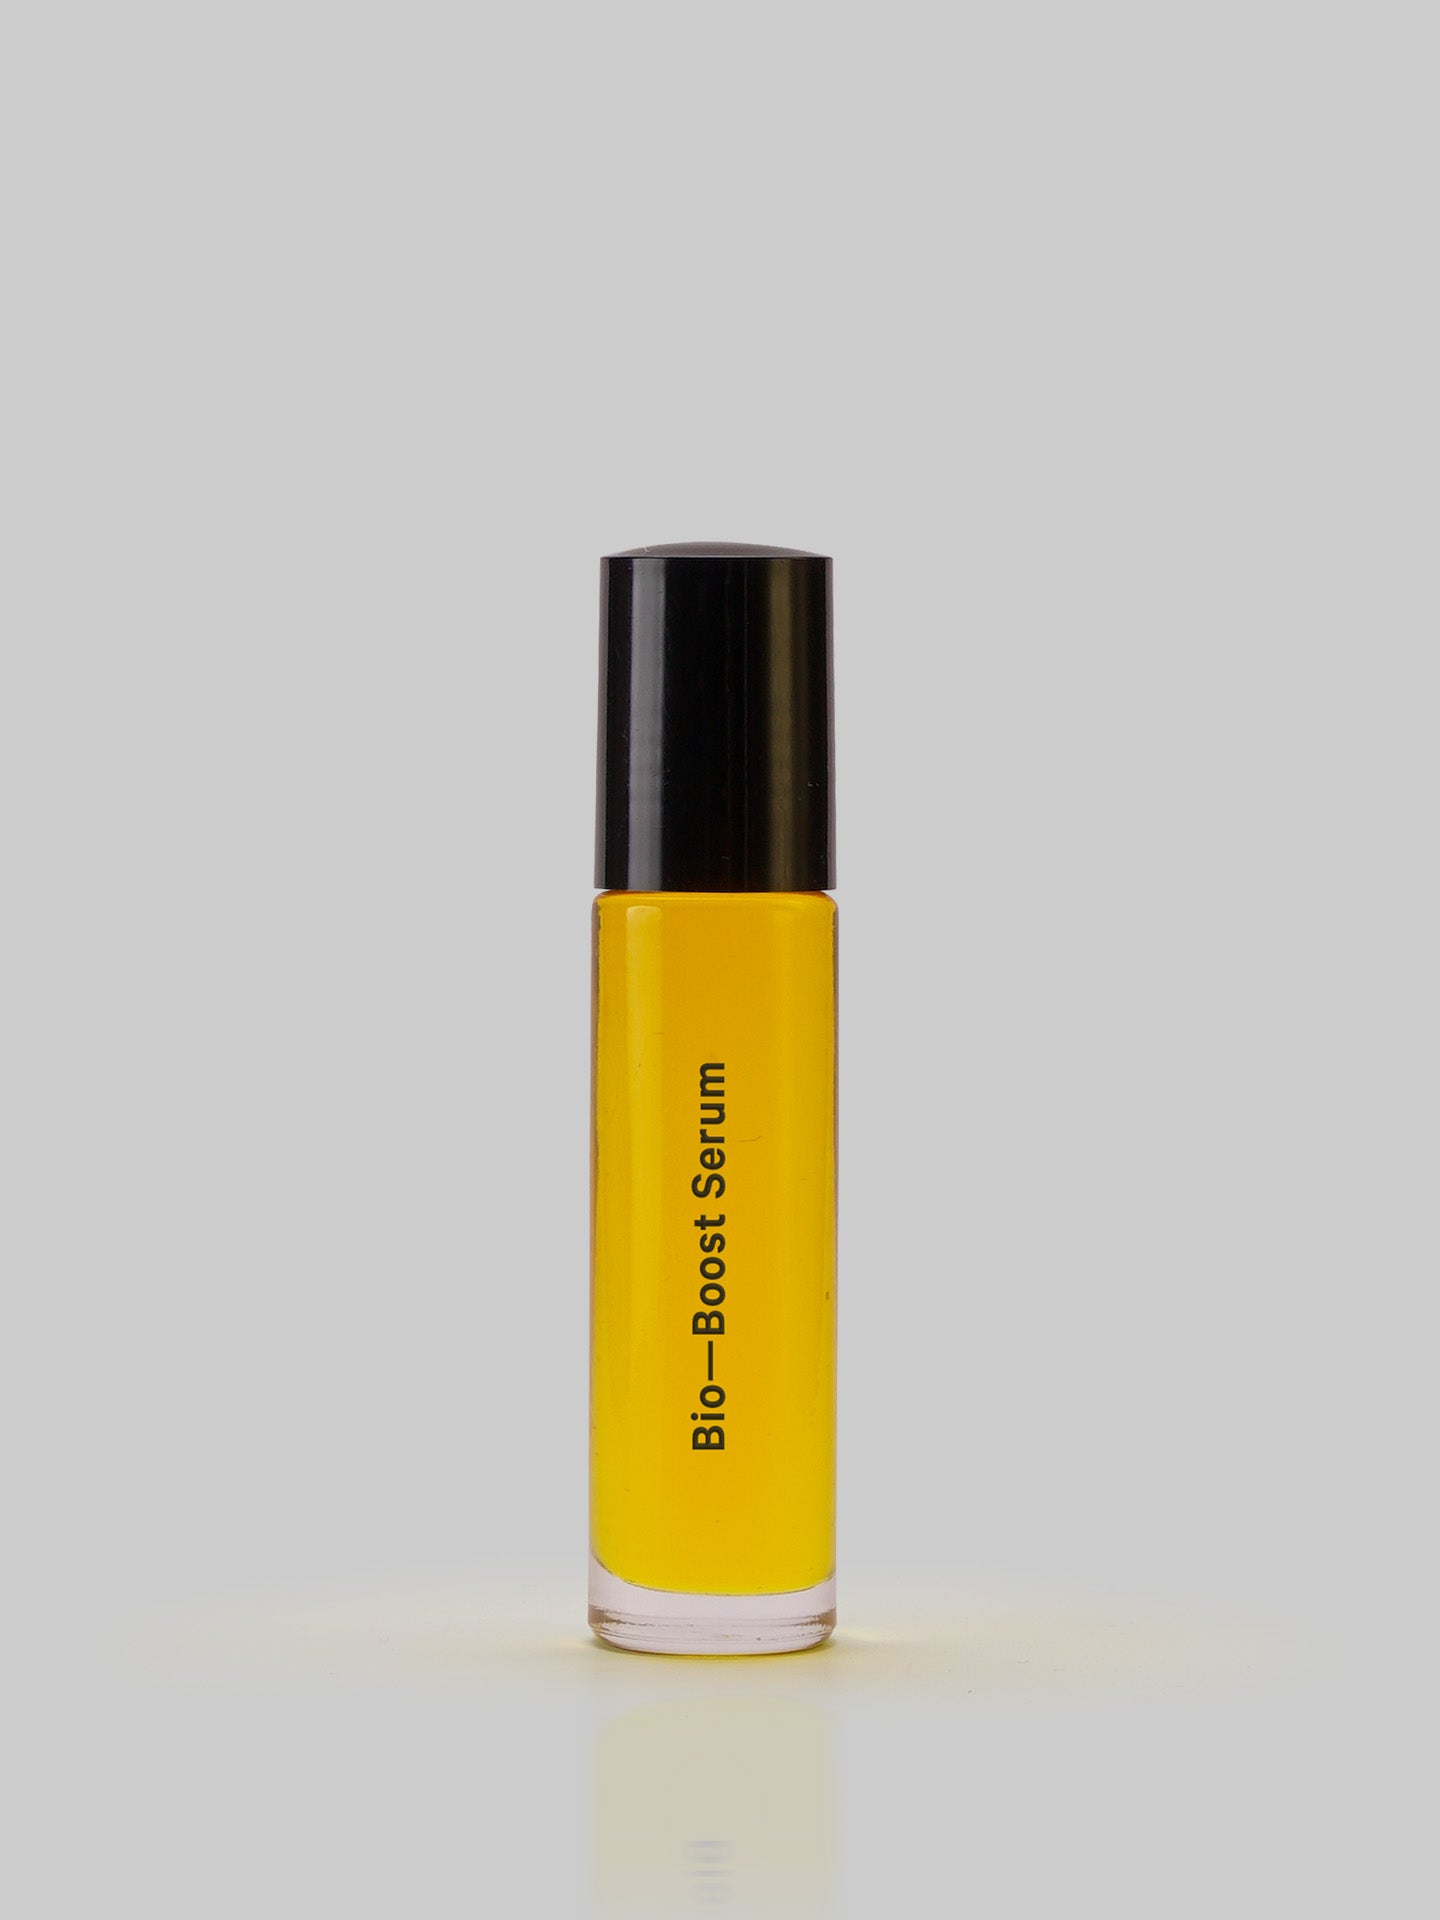 A yellow Bio-Boost – Serum bottle with a black cap on a grey background from MARYSE.